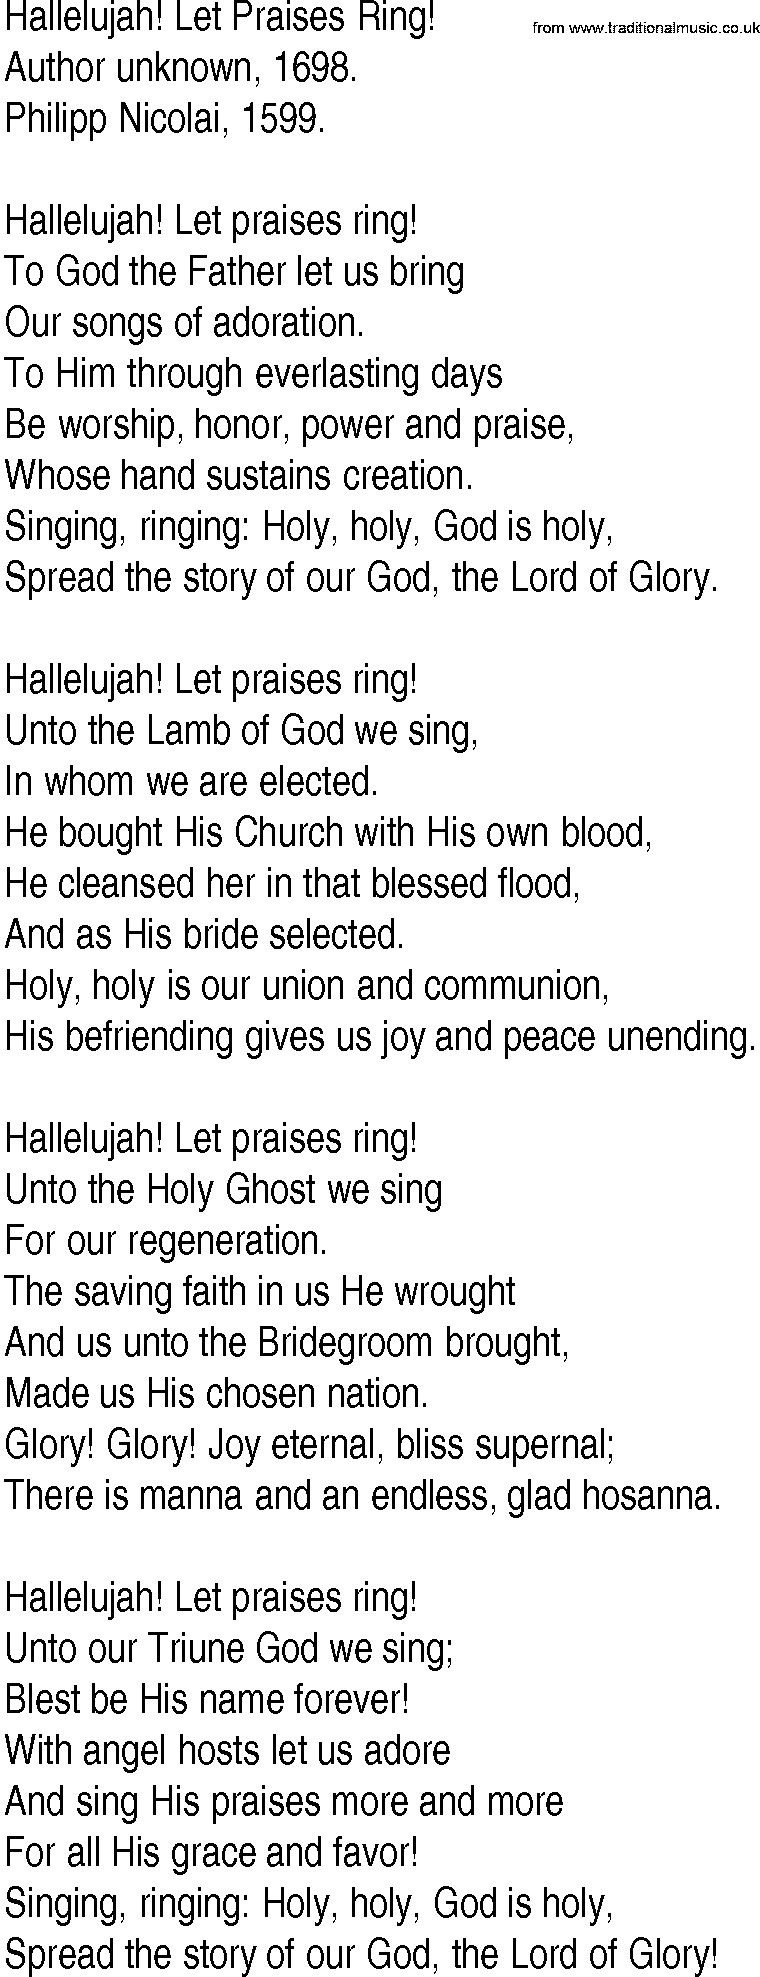 Hymn and Gospel Song: Hallelujah! Let Praises Ring! by Author unknown lyrics